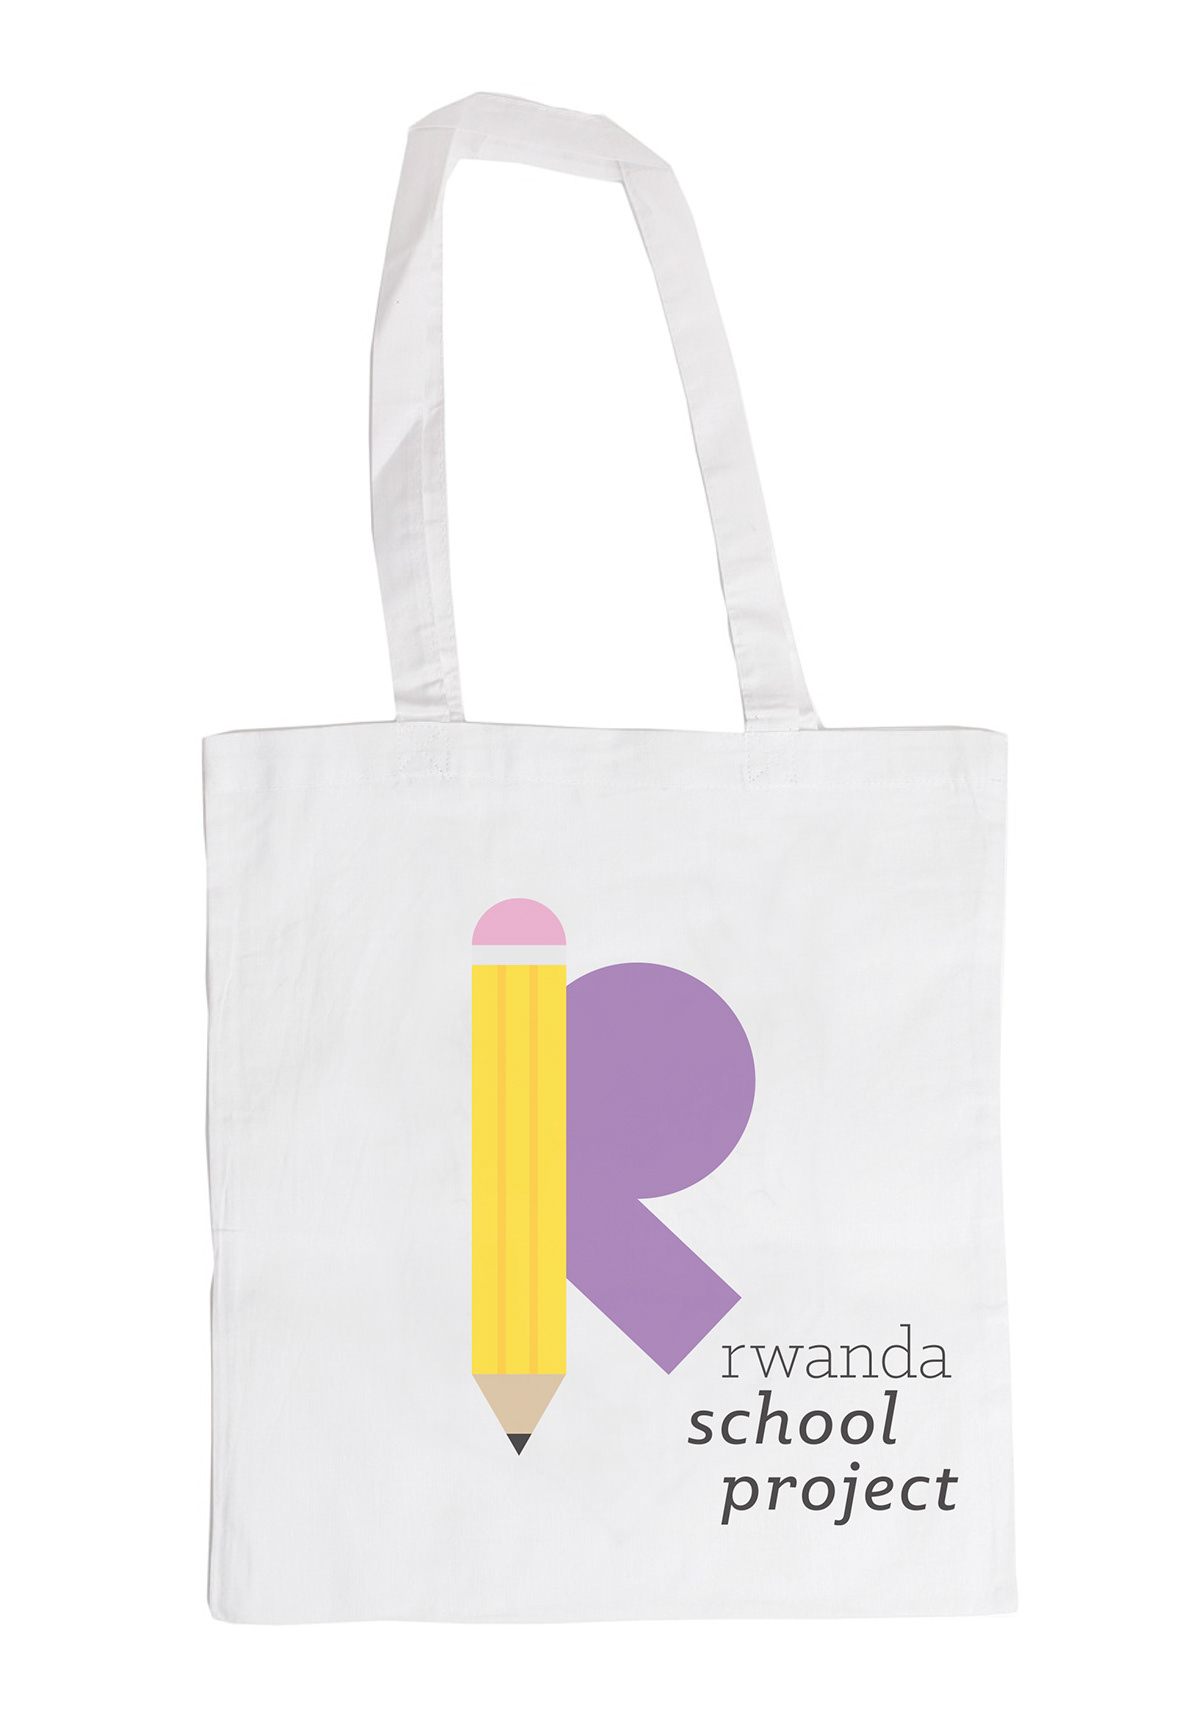 #RwandaSchoolProject #Branding #education #non-profit   #Touchpoints #webdesign #typography #stationery